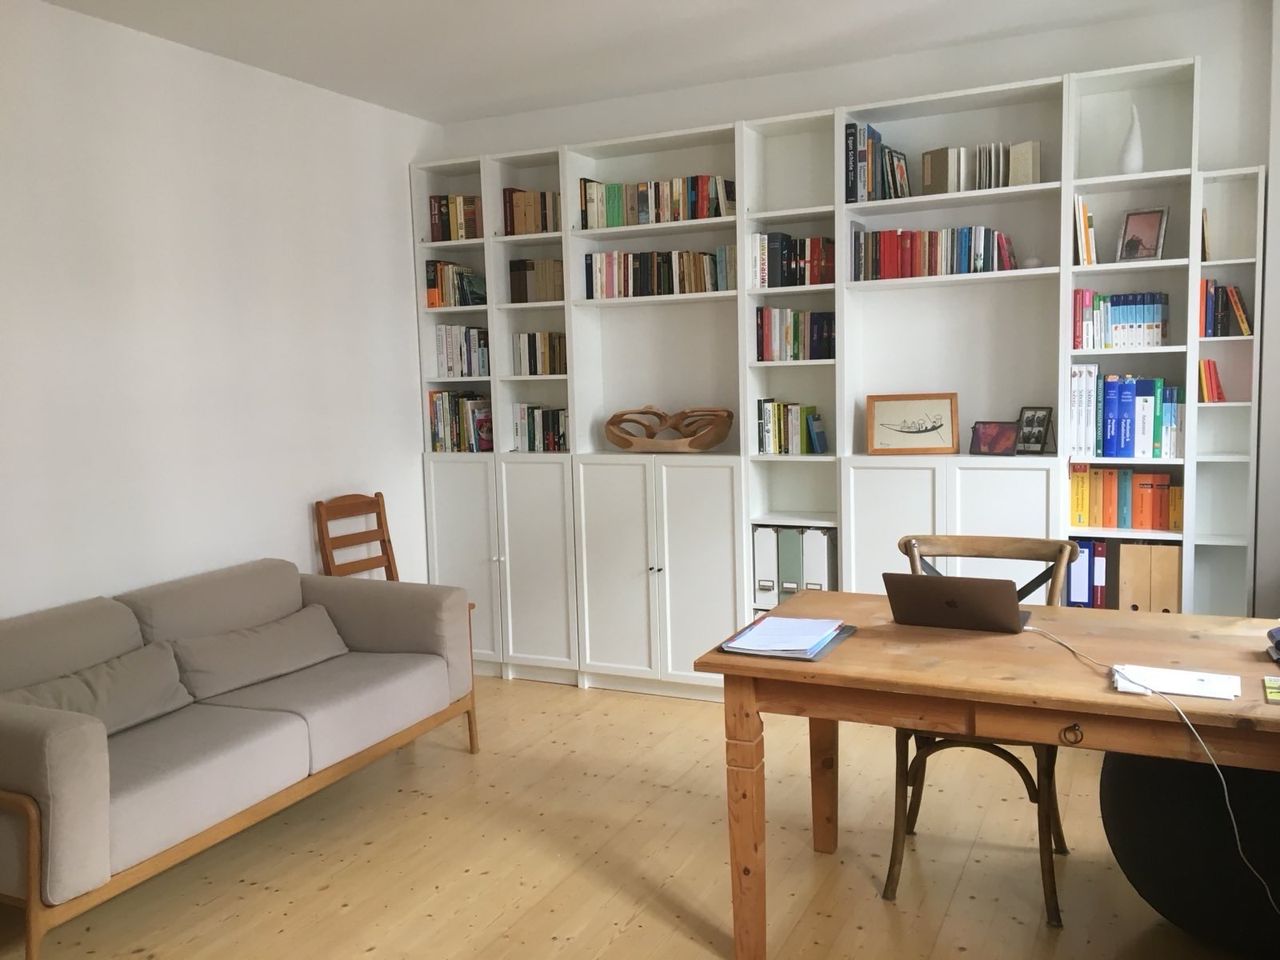 New & amazing flat located in Dresden